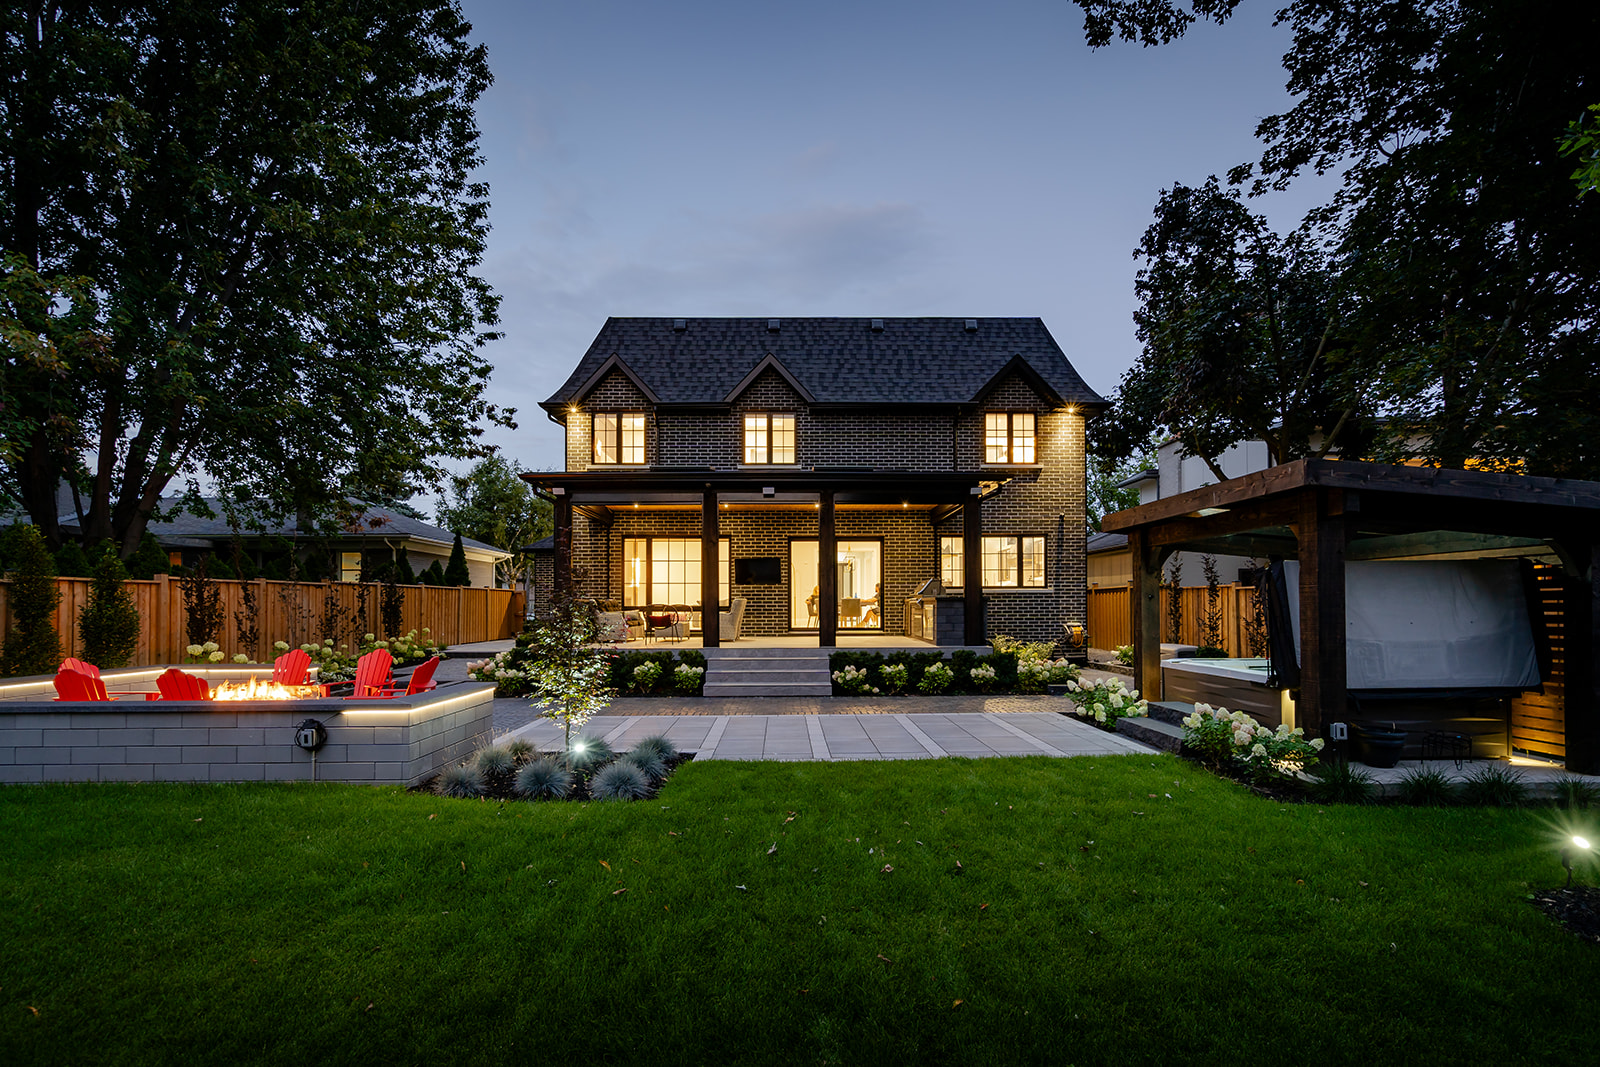 A patio setup with Muskoka chairs on the left and a hot tub on the right with lights on in the house.